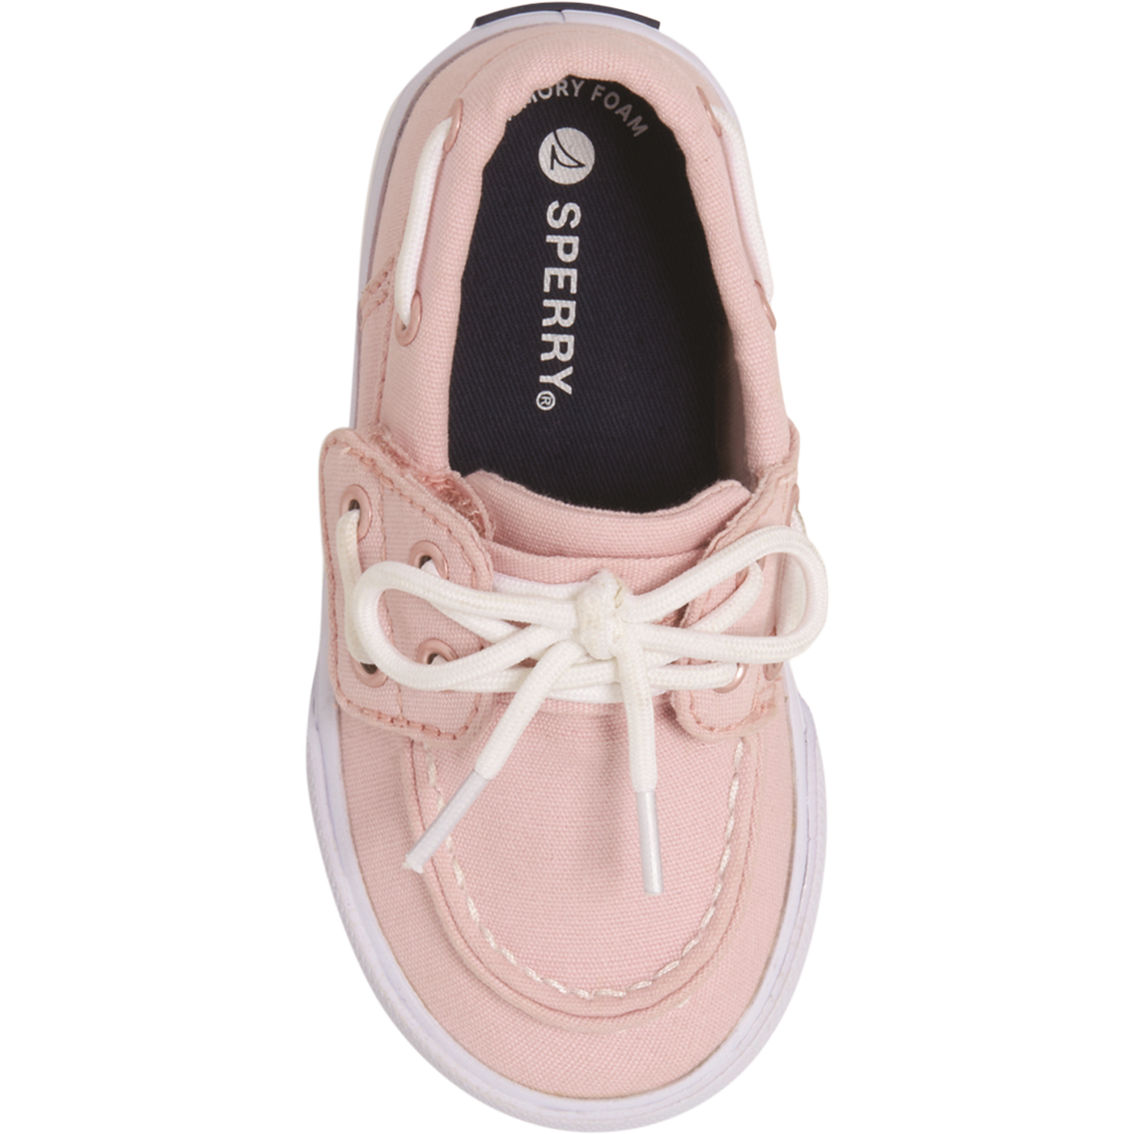 Sperry Toddler Girls Bahama Jr. Sneakers - Image 4 of 5